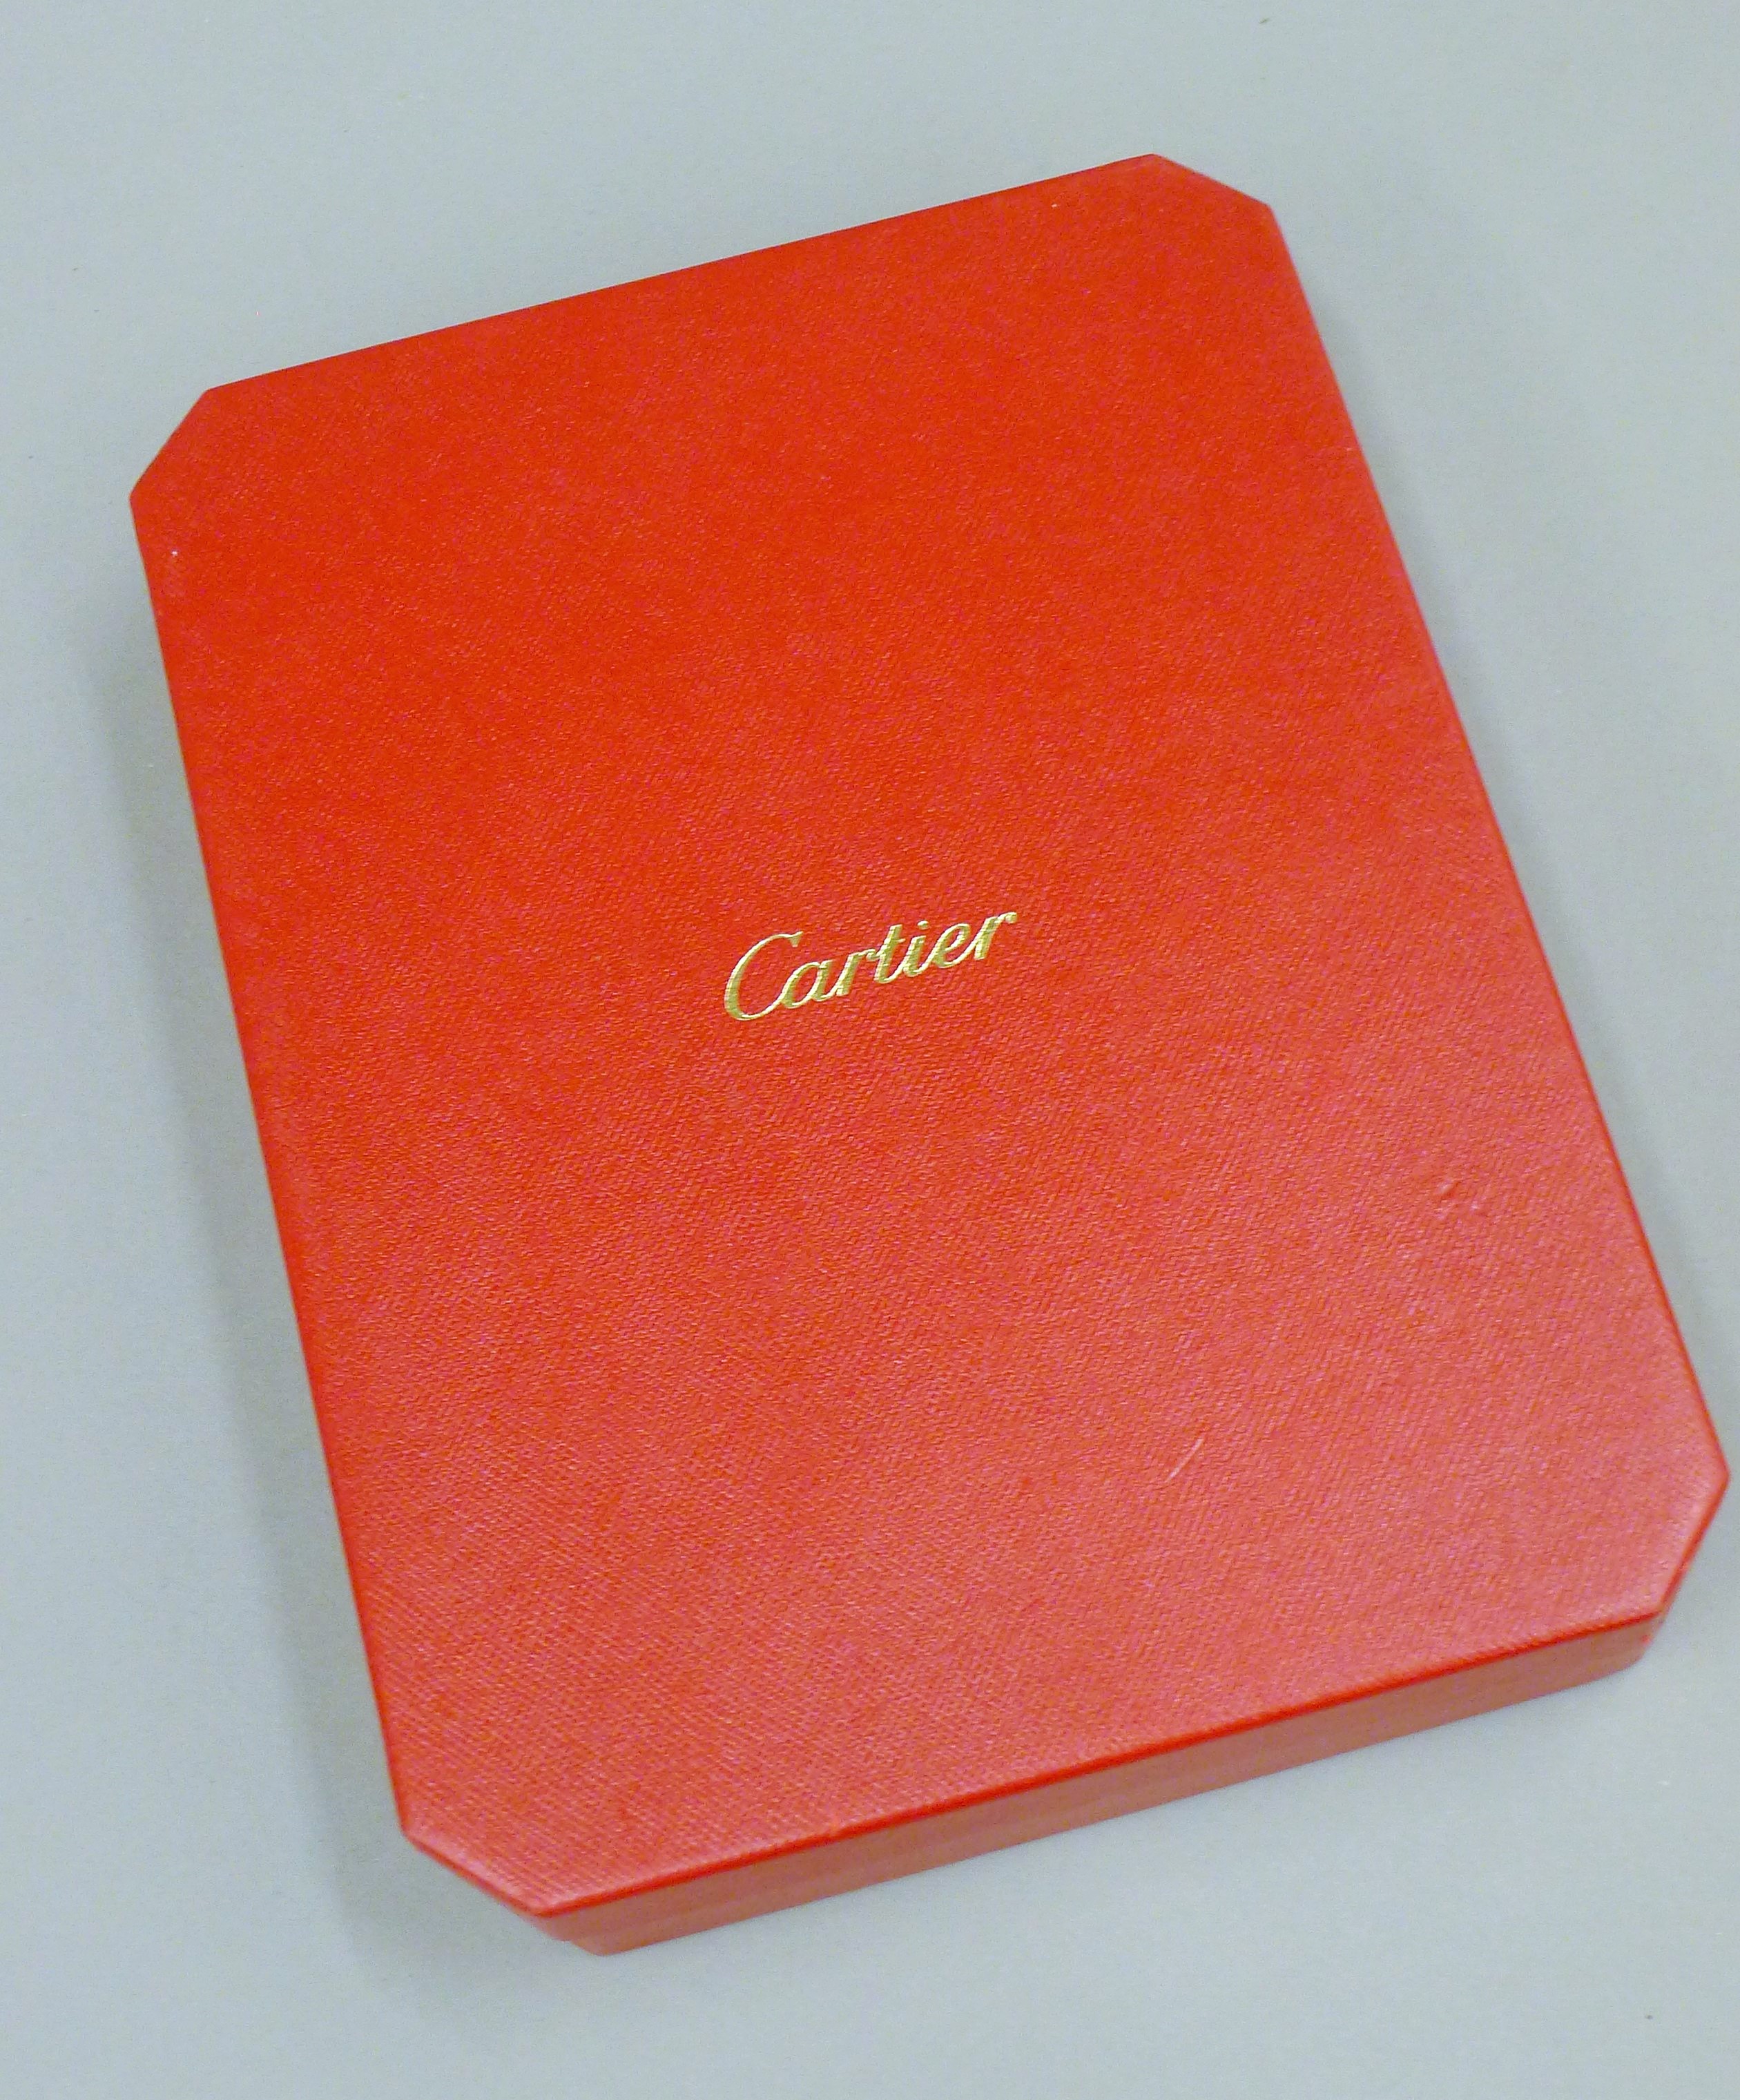 A Cartier watch user guide booklet in box.